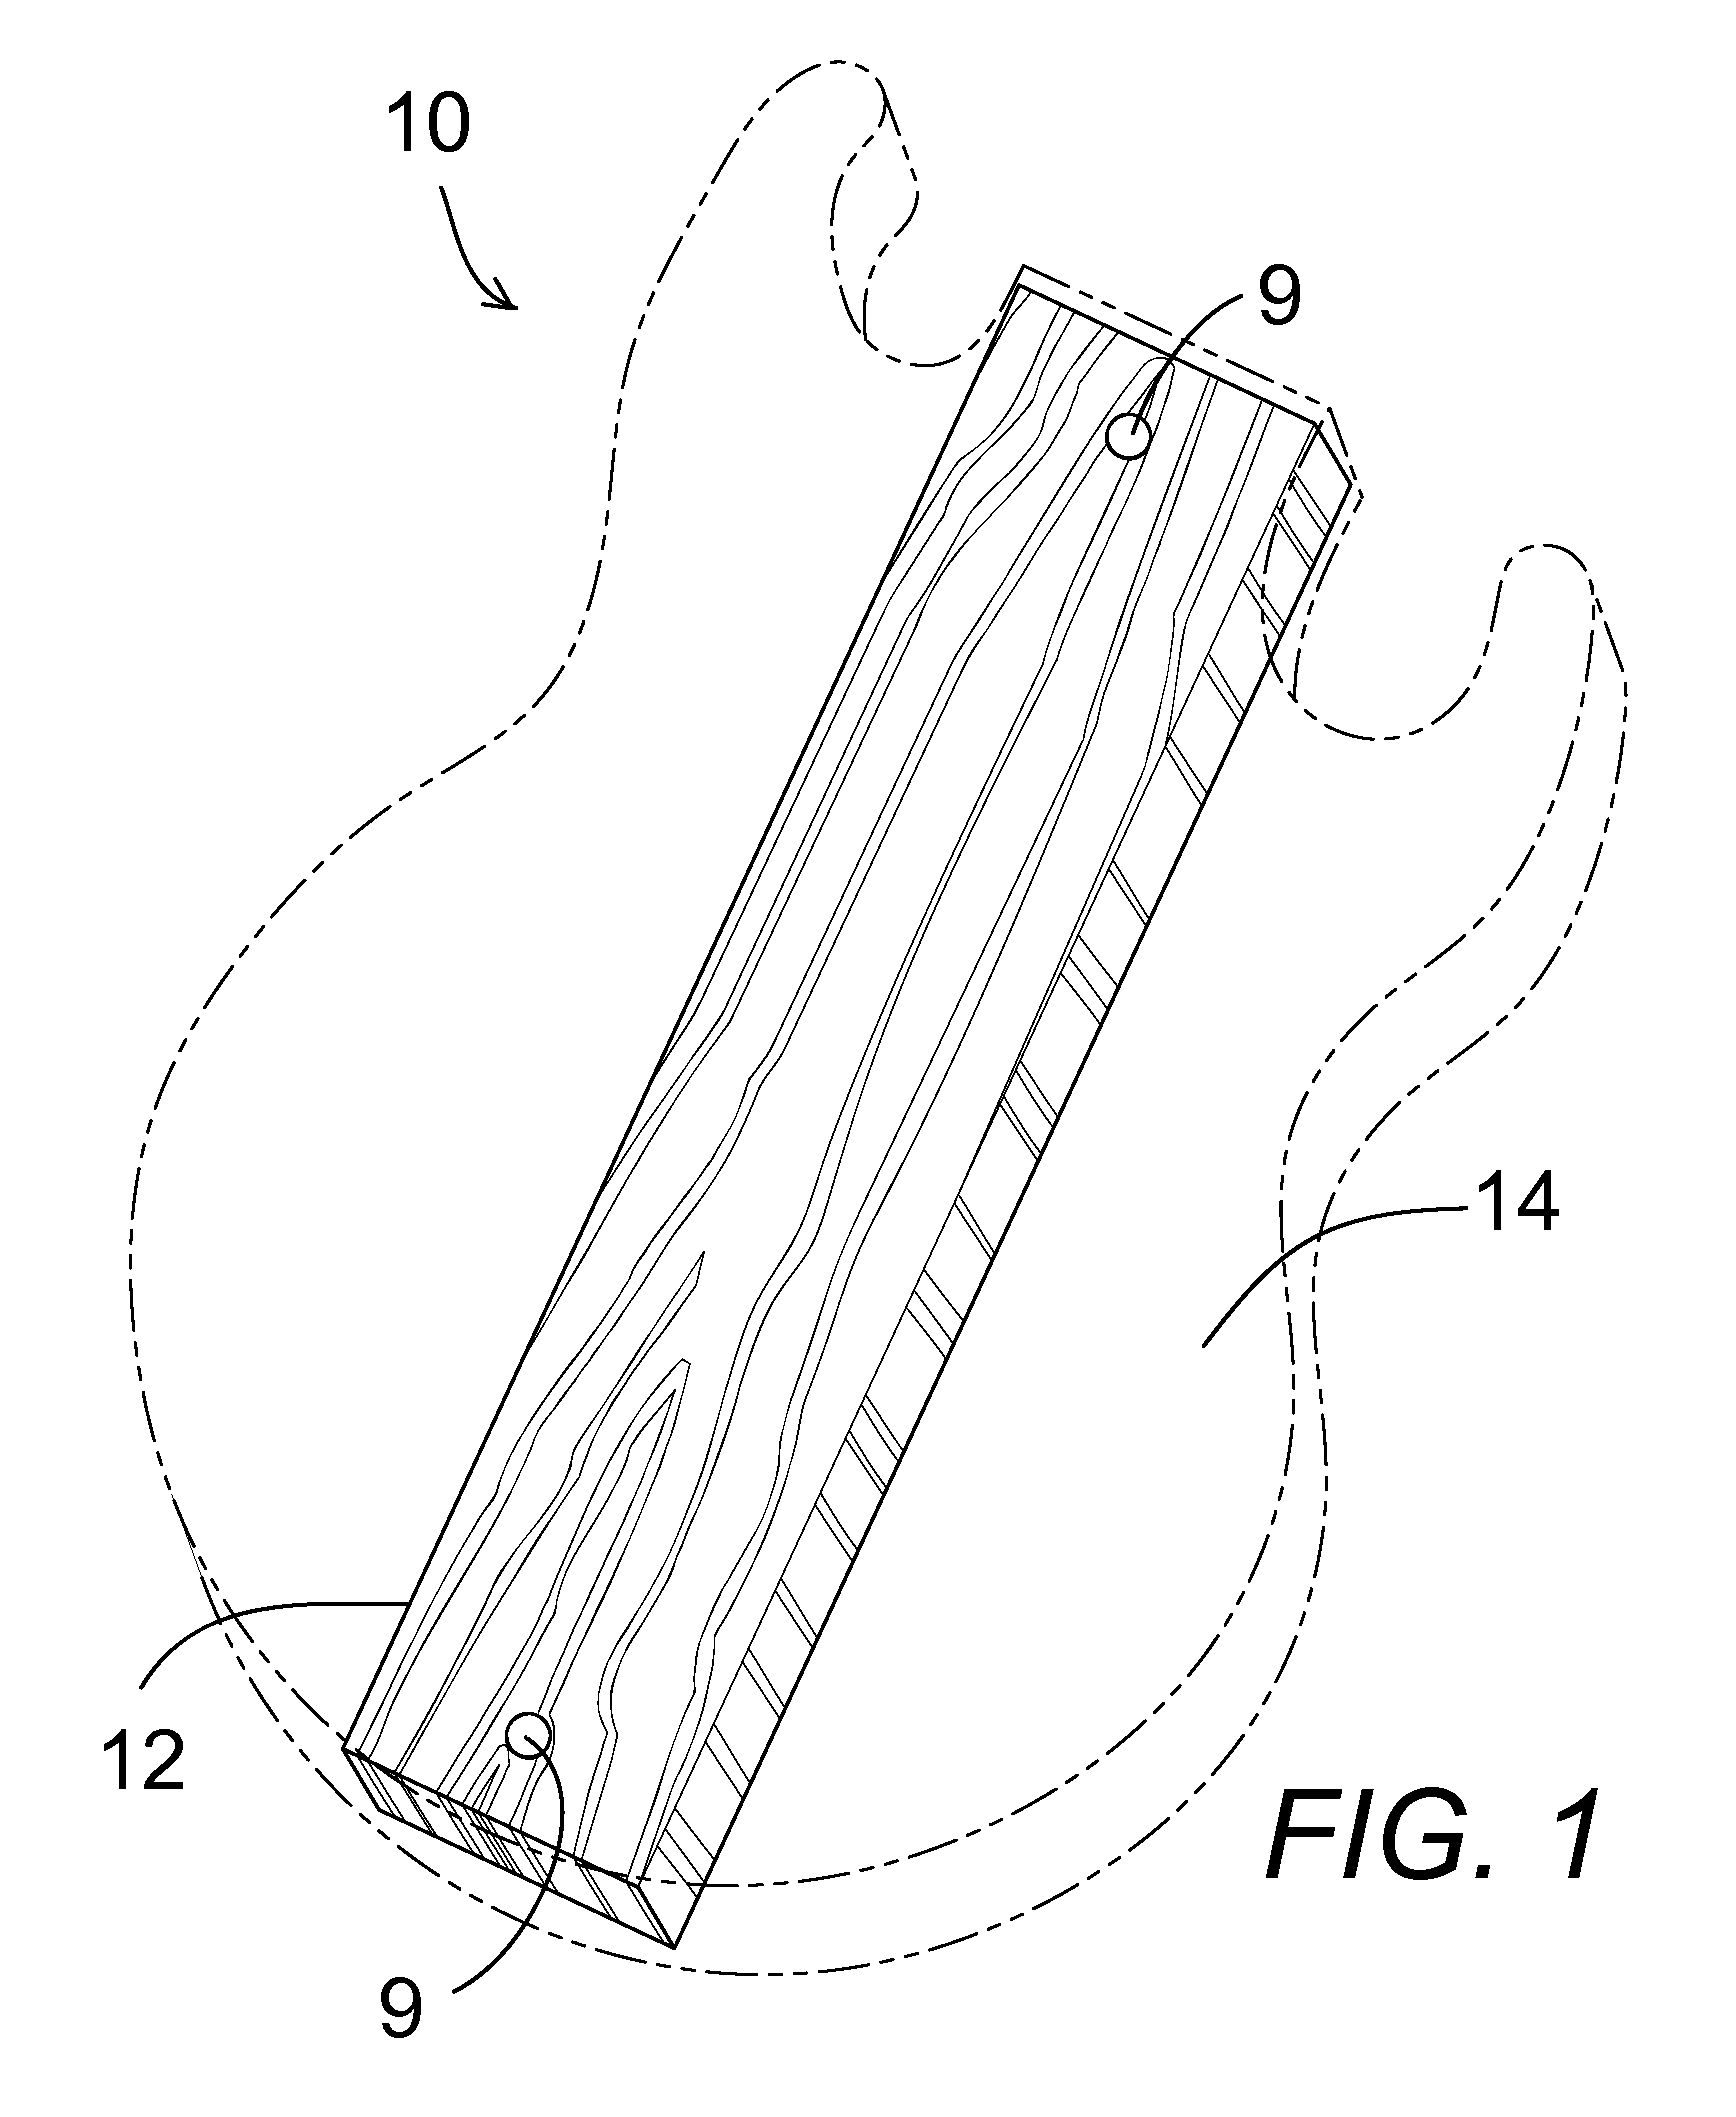 Molded stringed instrument body with wooden core